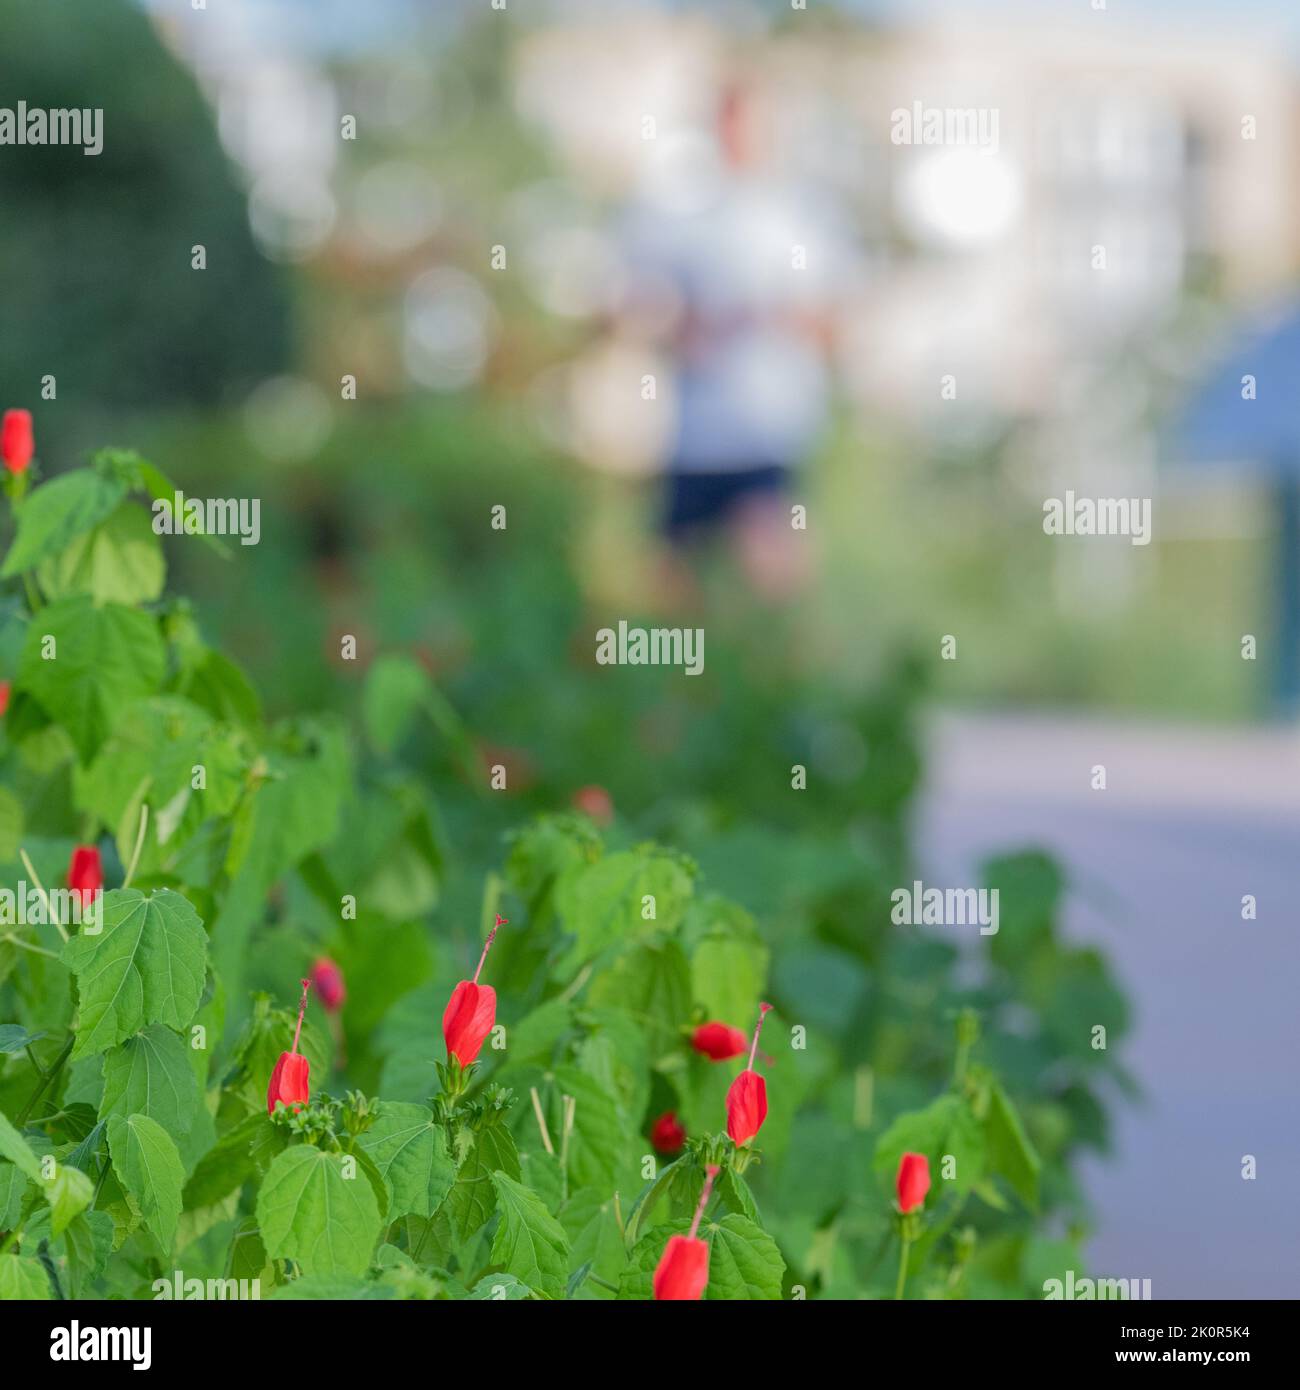 Turk's cap plant in the foreground is in focus while the runner in the background is out of focus. Stock Photo